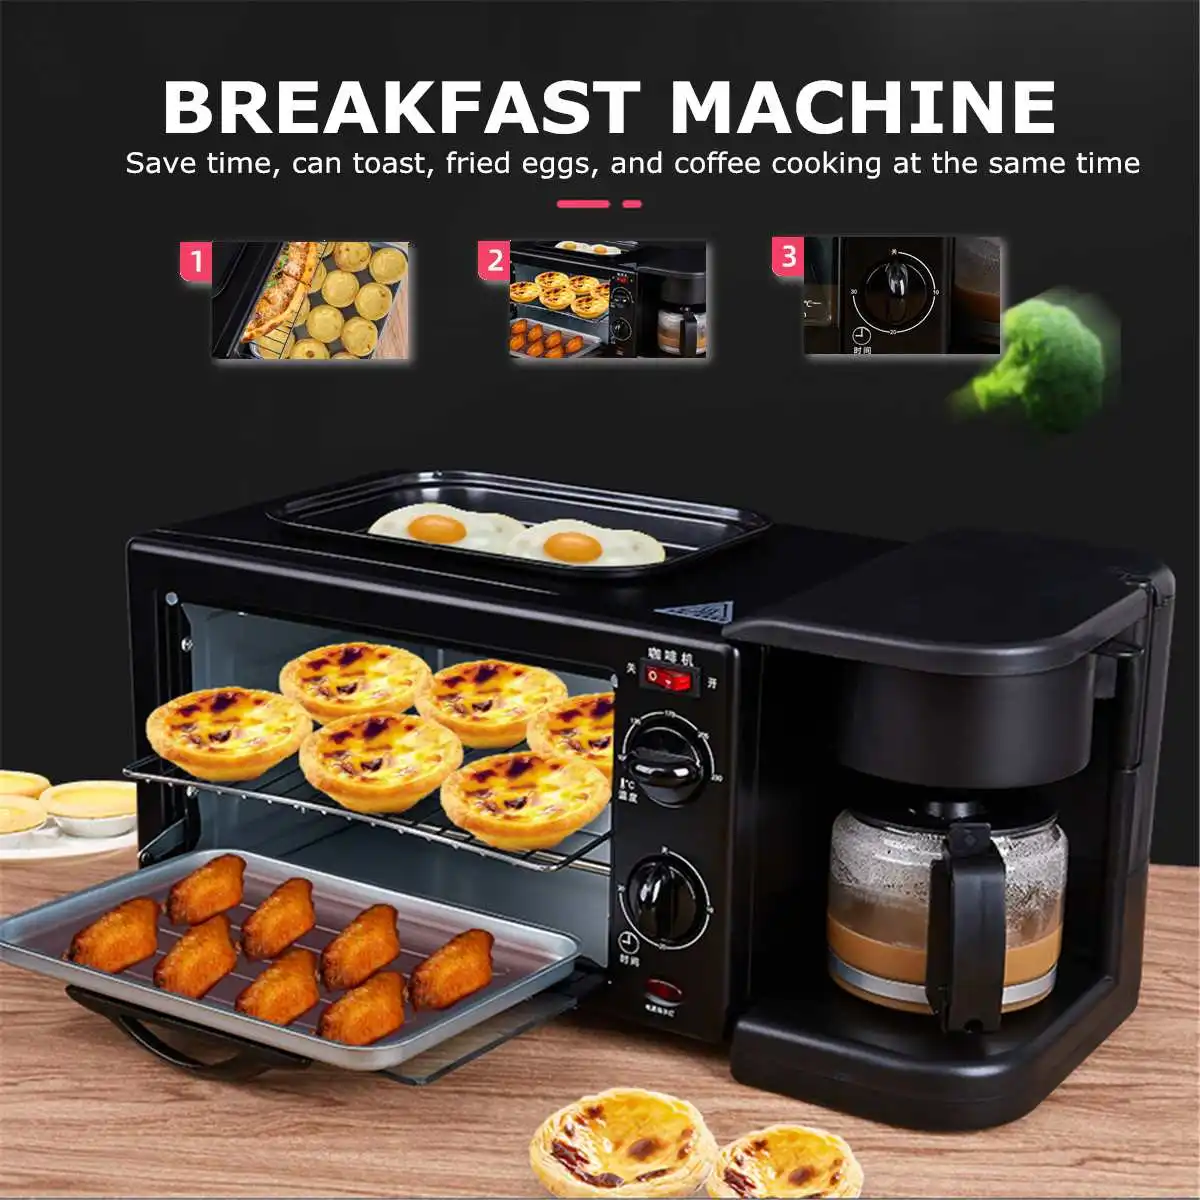 220V Multifunction 3 In 1 Breakfast Machine Toaster Oven Electric Frying Coffee 